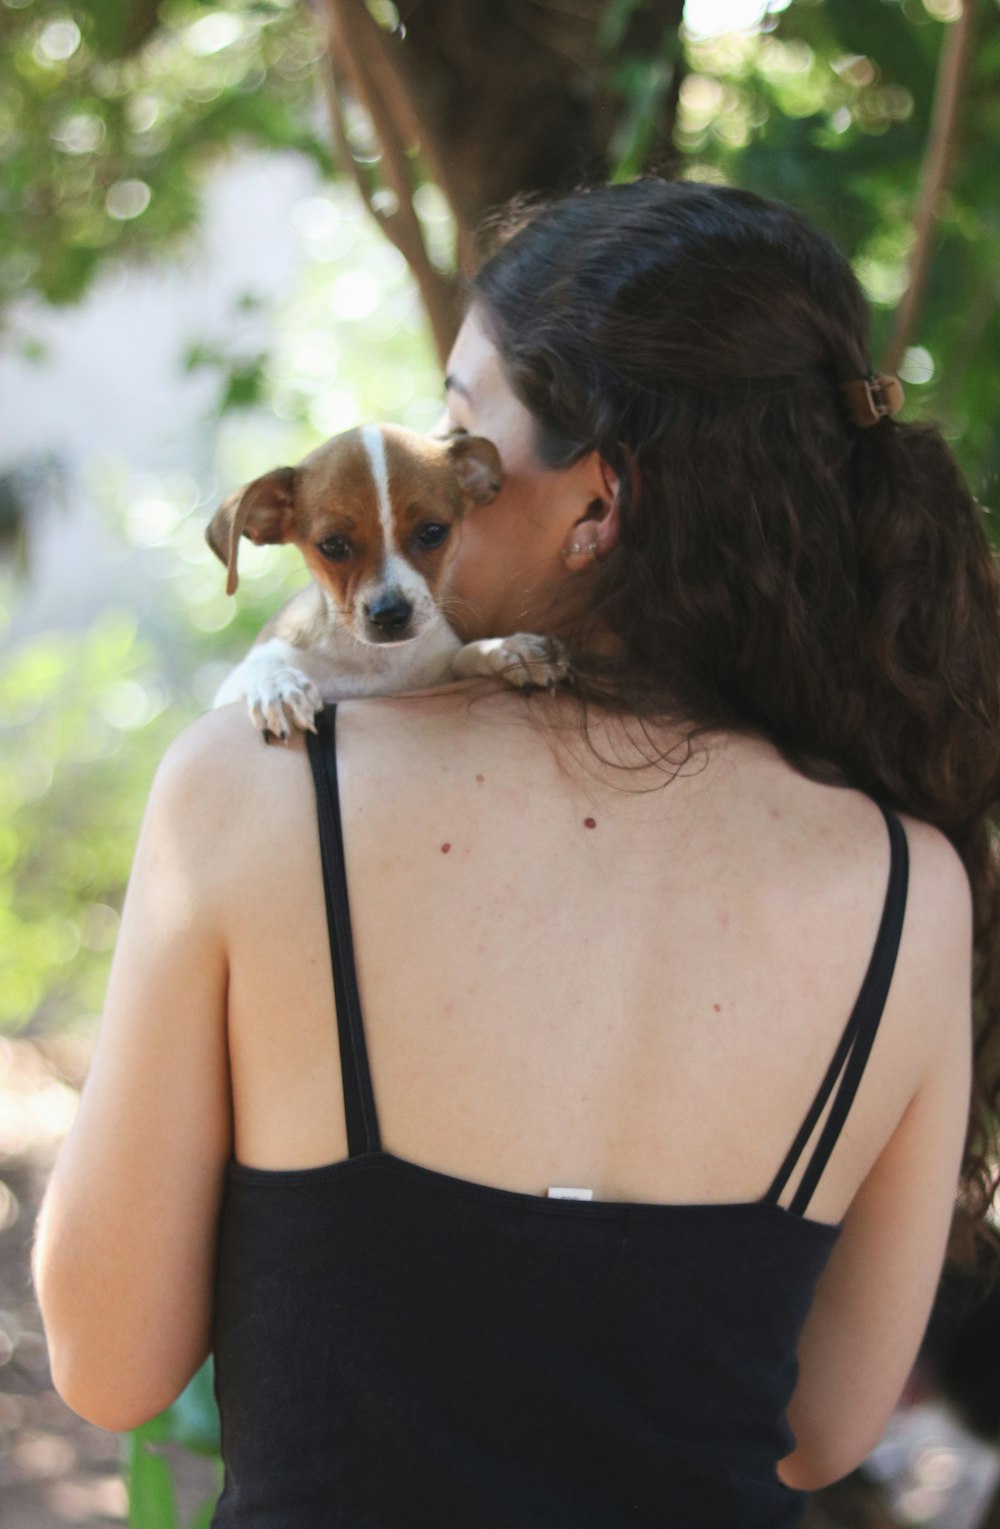 woman in black tank top carrying brown and white short coated dog